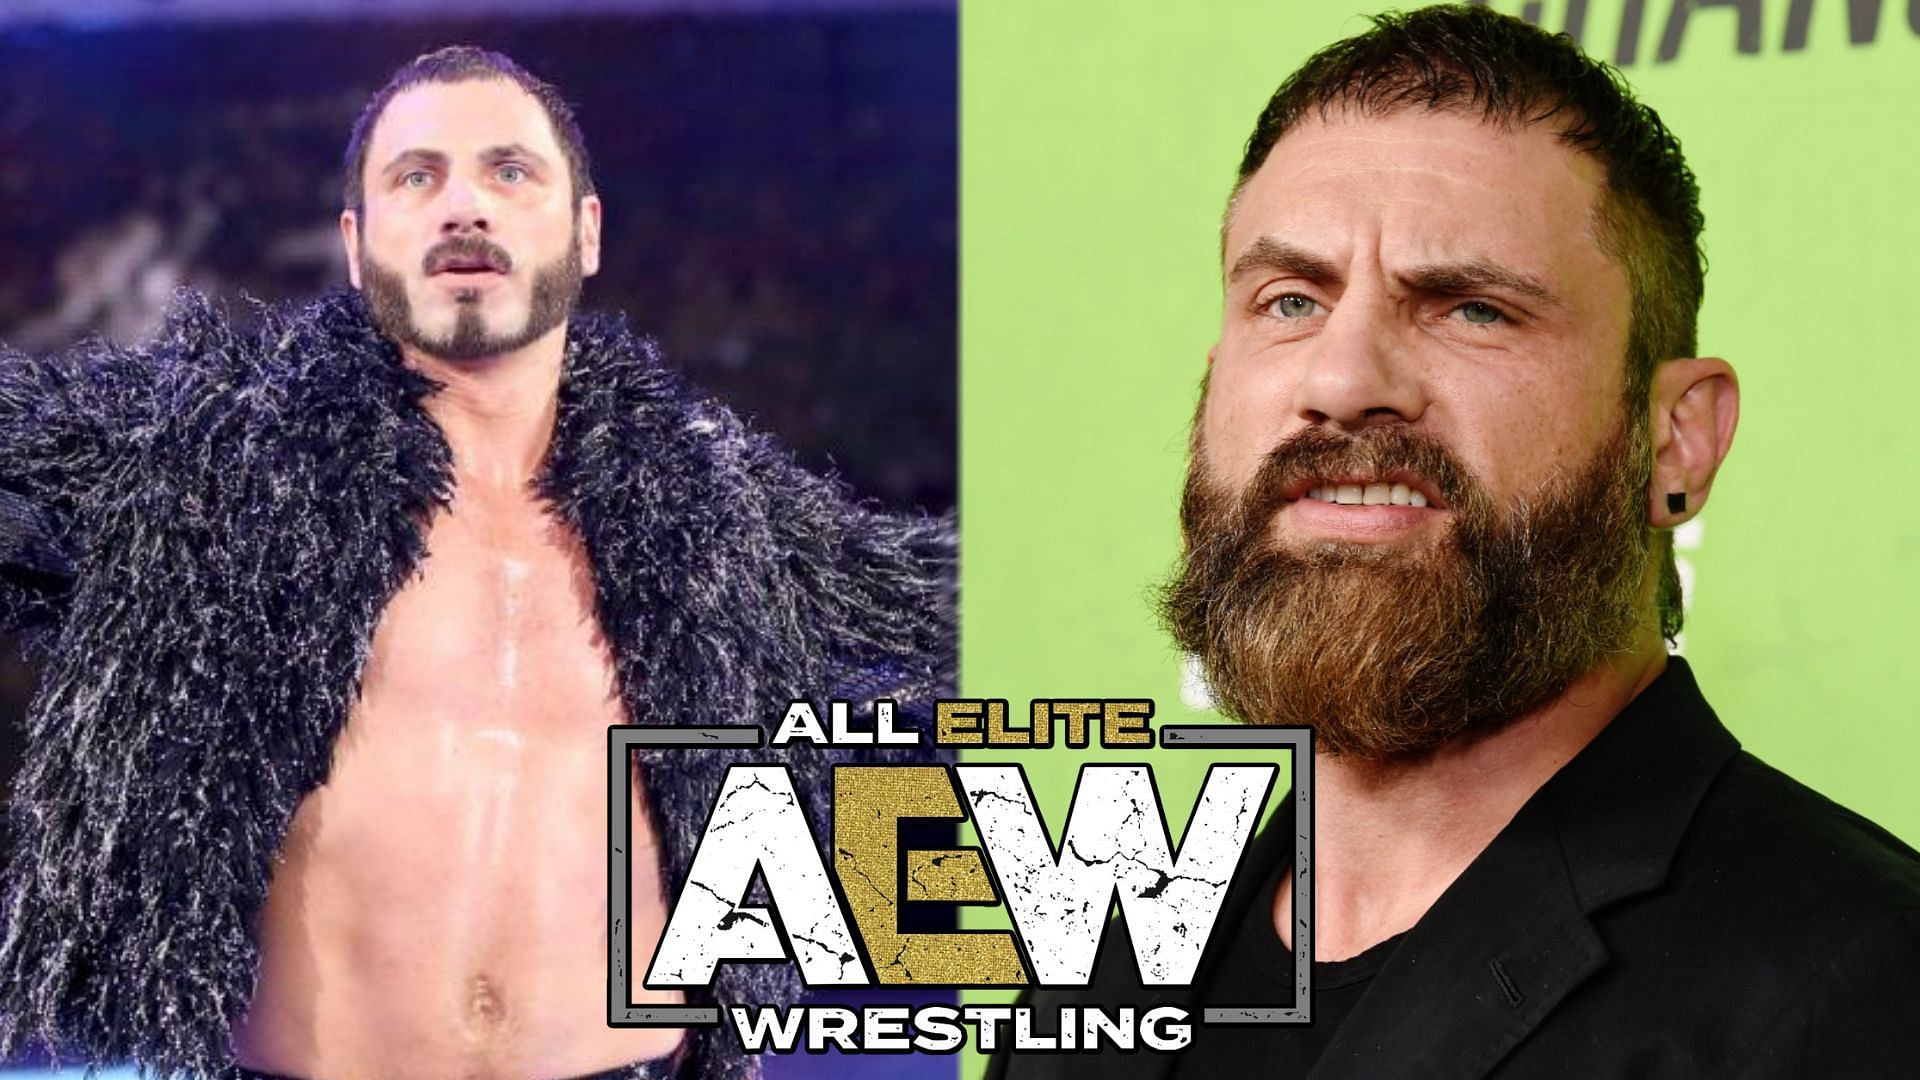 Could Austin Aries ever make his way into AEW?